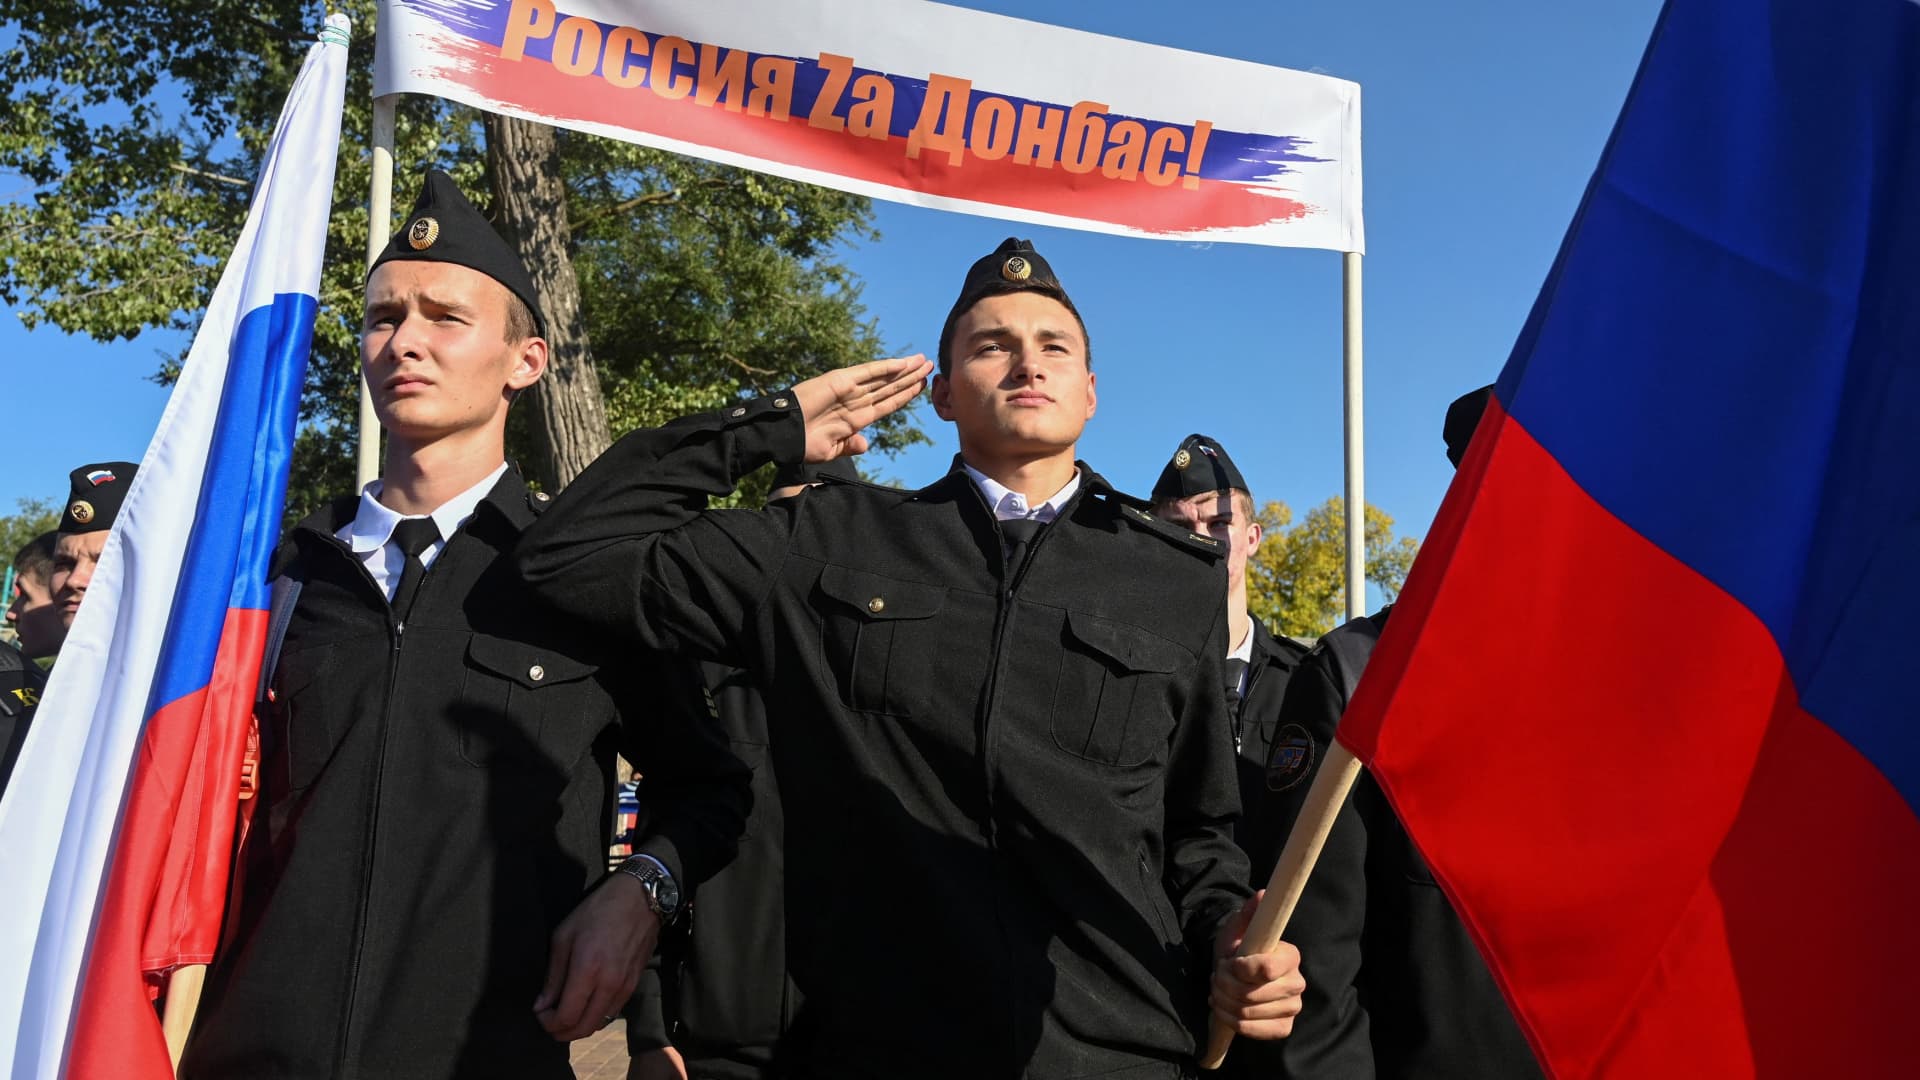 Cadets attend an event marking the declared annexation of the Russian-controlled territories of four Ukraine's Donetsk, Luhansk, Kherson and Zaporizhzhia regions, after holding what Russian authorities called referendums in the occupied areas of Ukraine that were condemned by Kyiv and governments worldwide, in Rostov-on-Don, Russia, September 30, 2022.